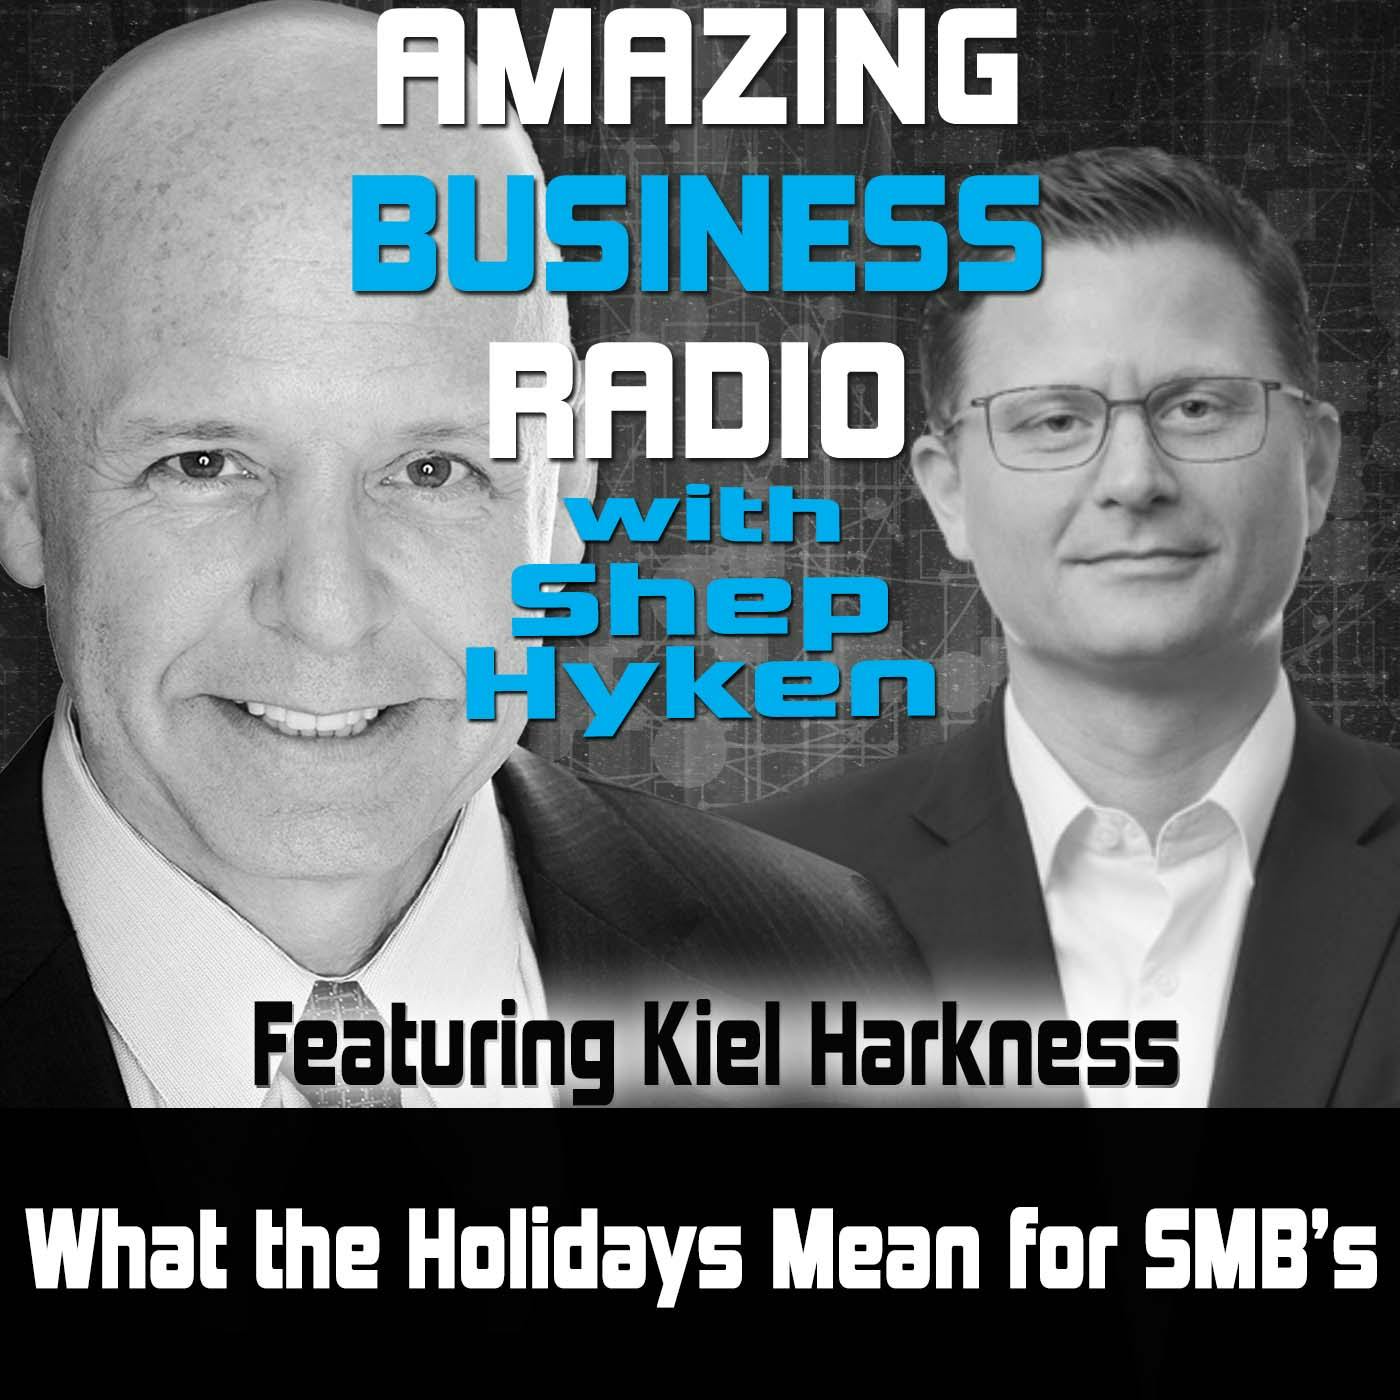 What the Holidays Mean for SMB’s Featuring Kiel Harkness